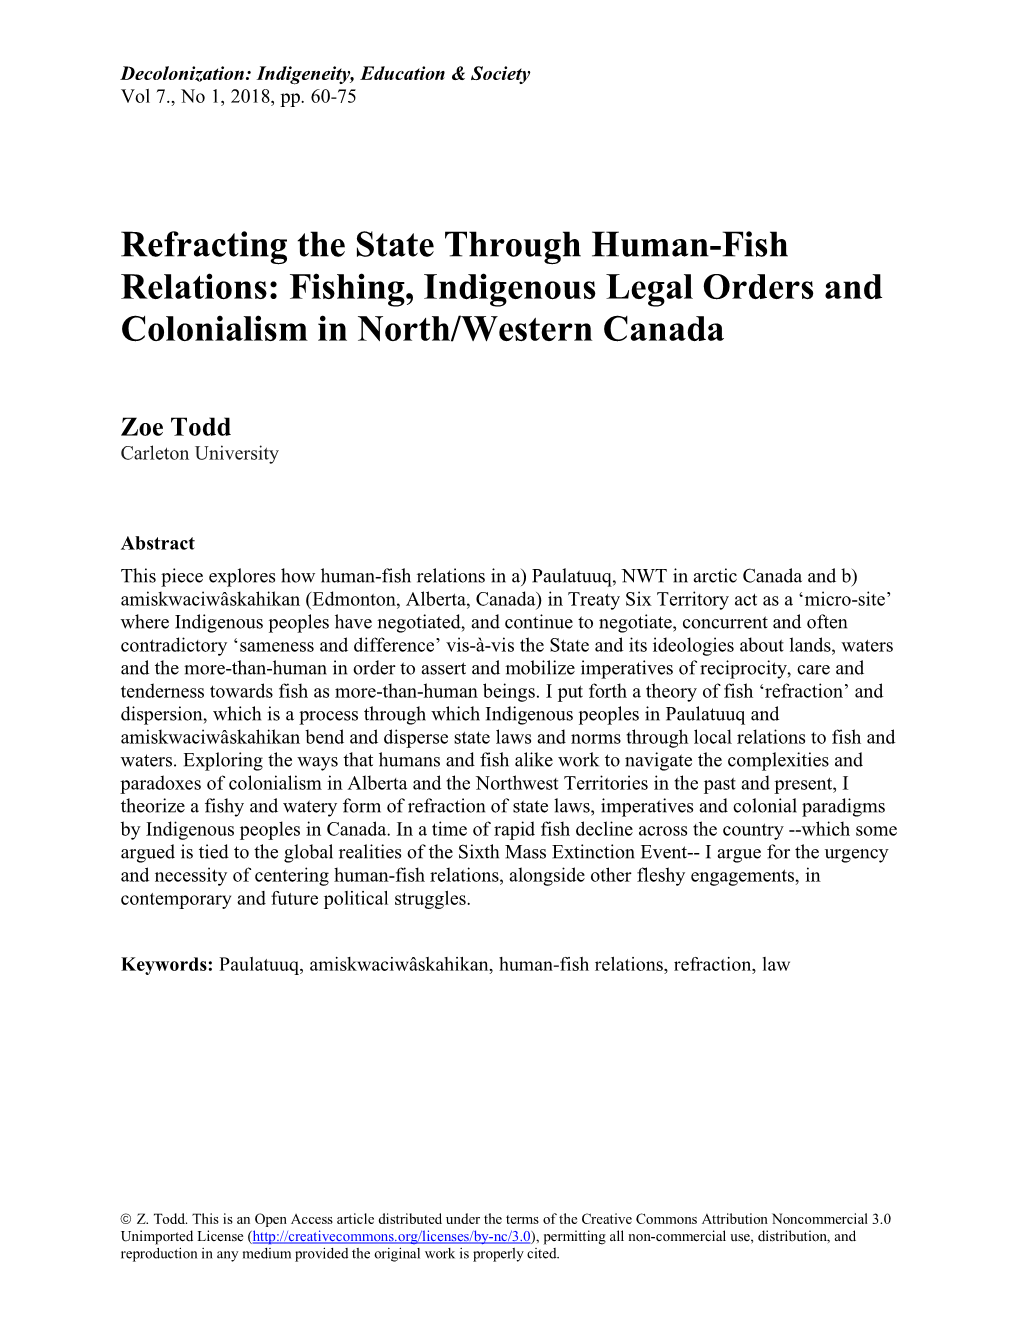 Refracting the State Through Human-Fish Relations: Fishing, Indigenous Legal Orders and Colonialism in North/Western Canada